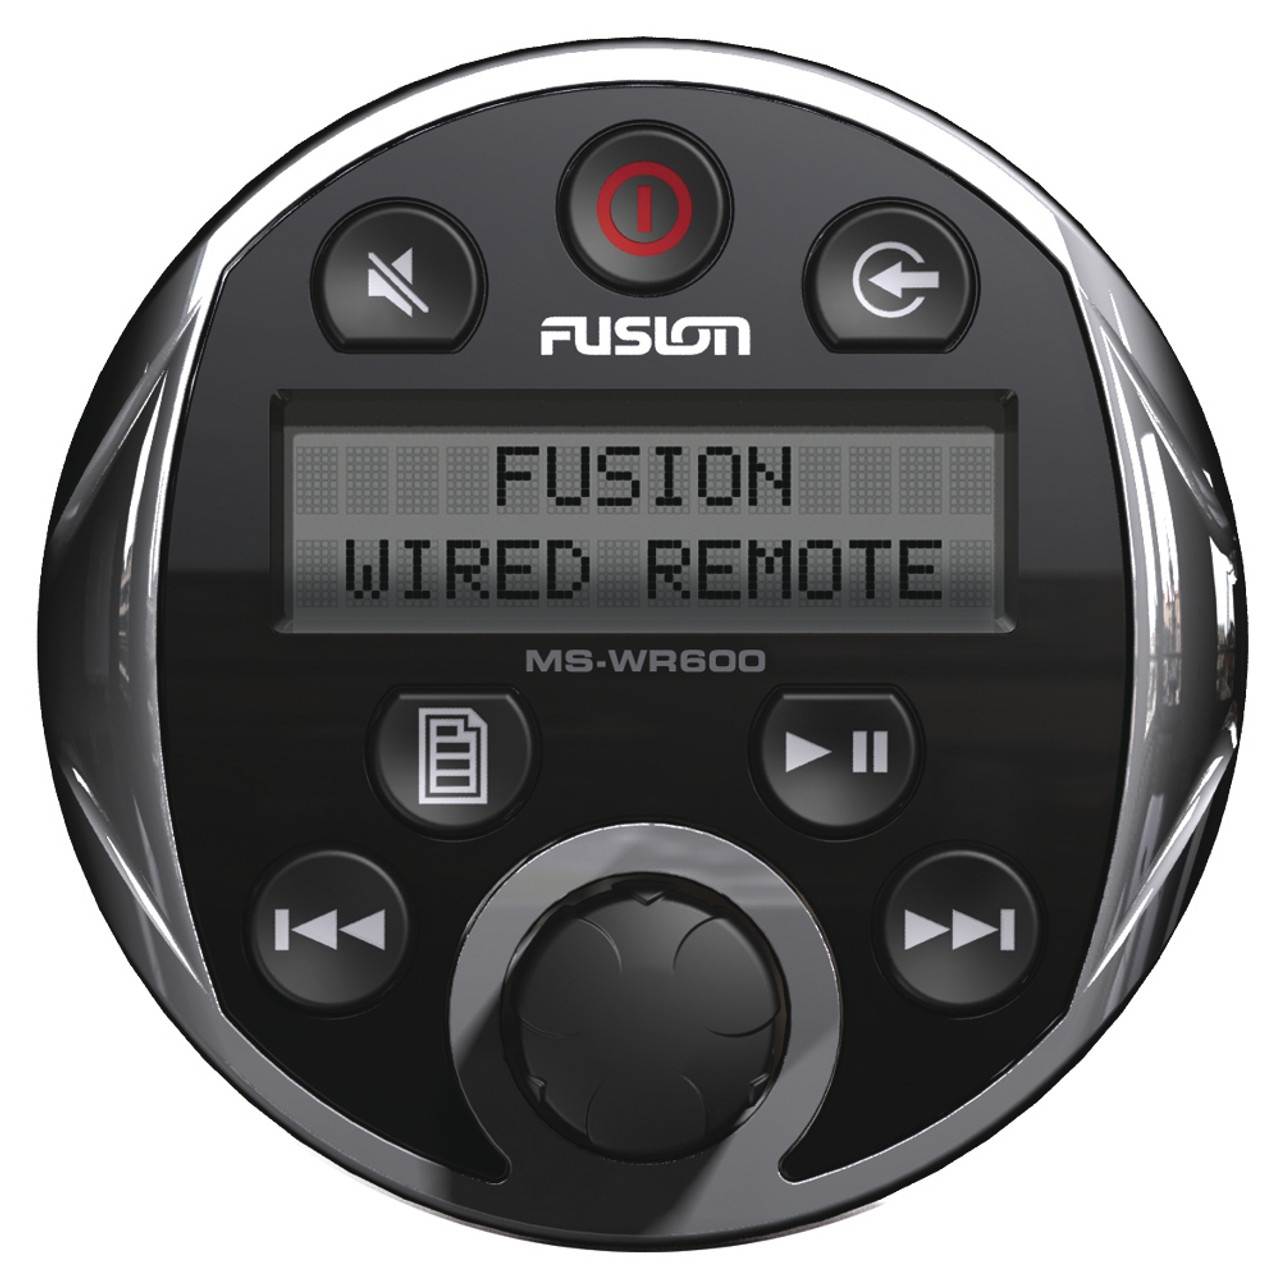 Fusion Chrome Waterproof Wired Remote For 600 Series Fusion Stereos